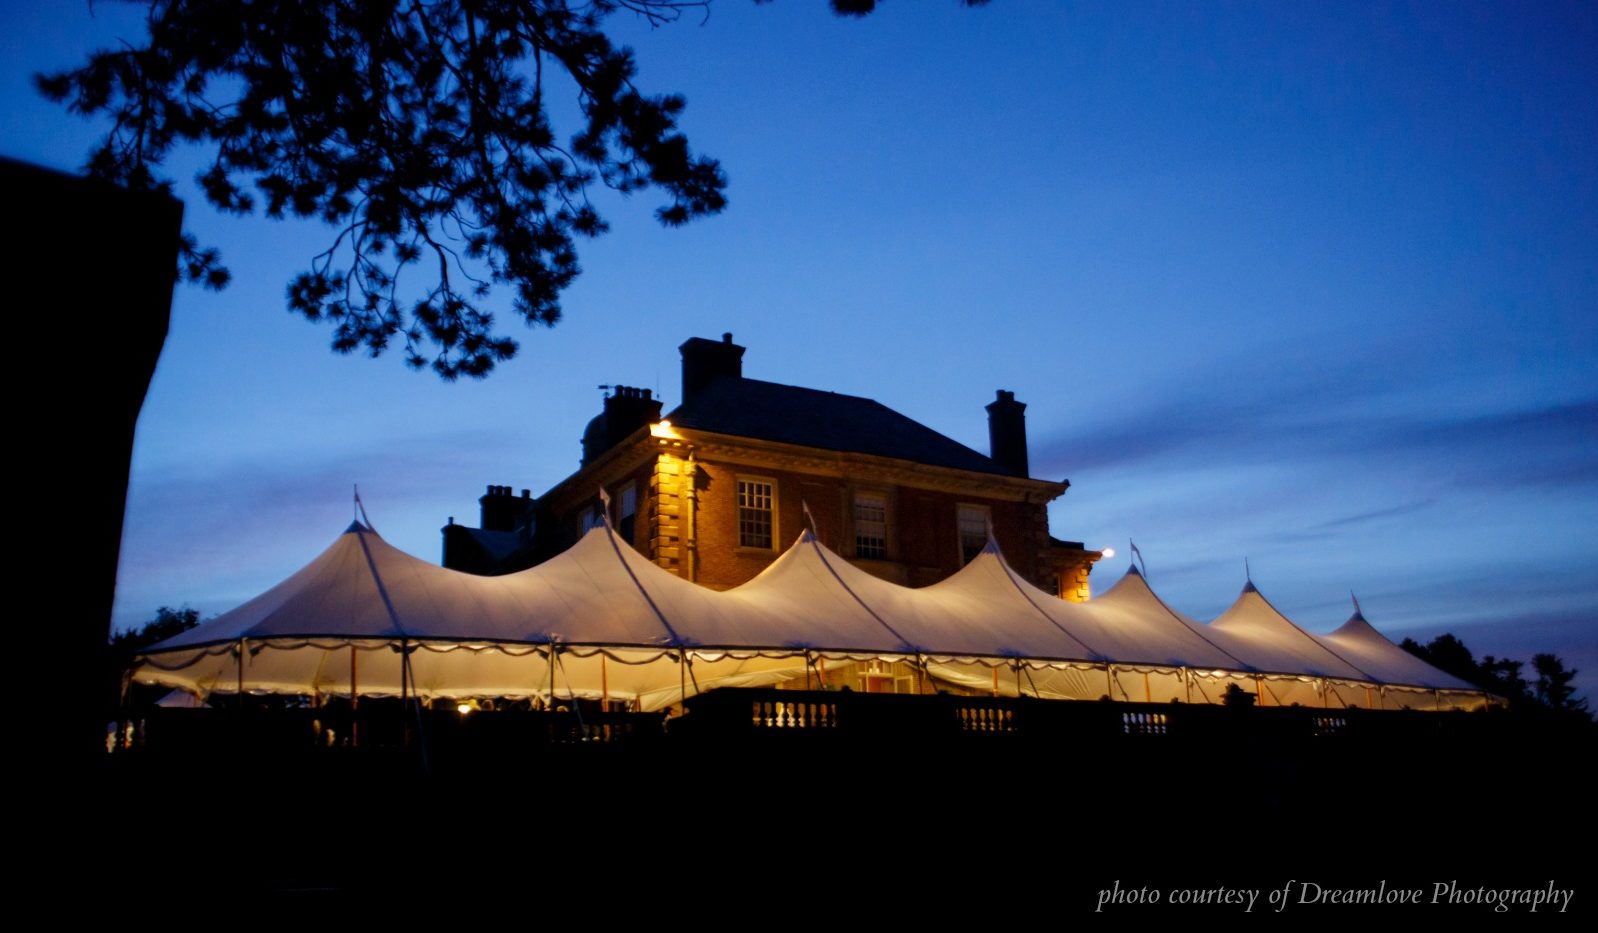 Large tent with six peaks, evening view next to estate, tent aglow. 